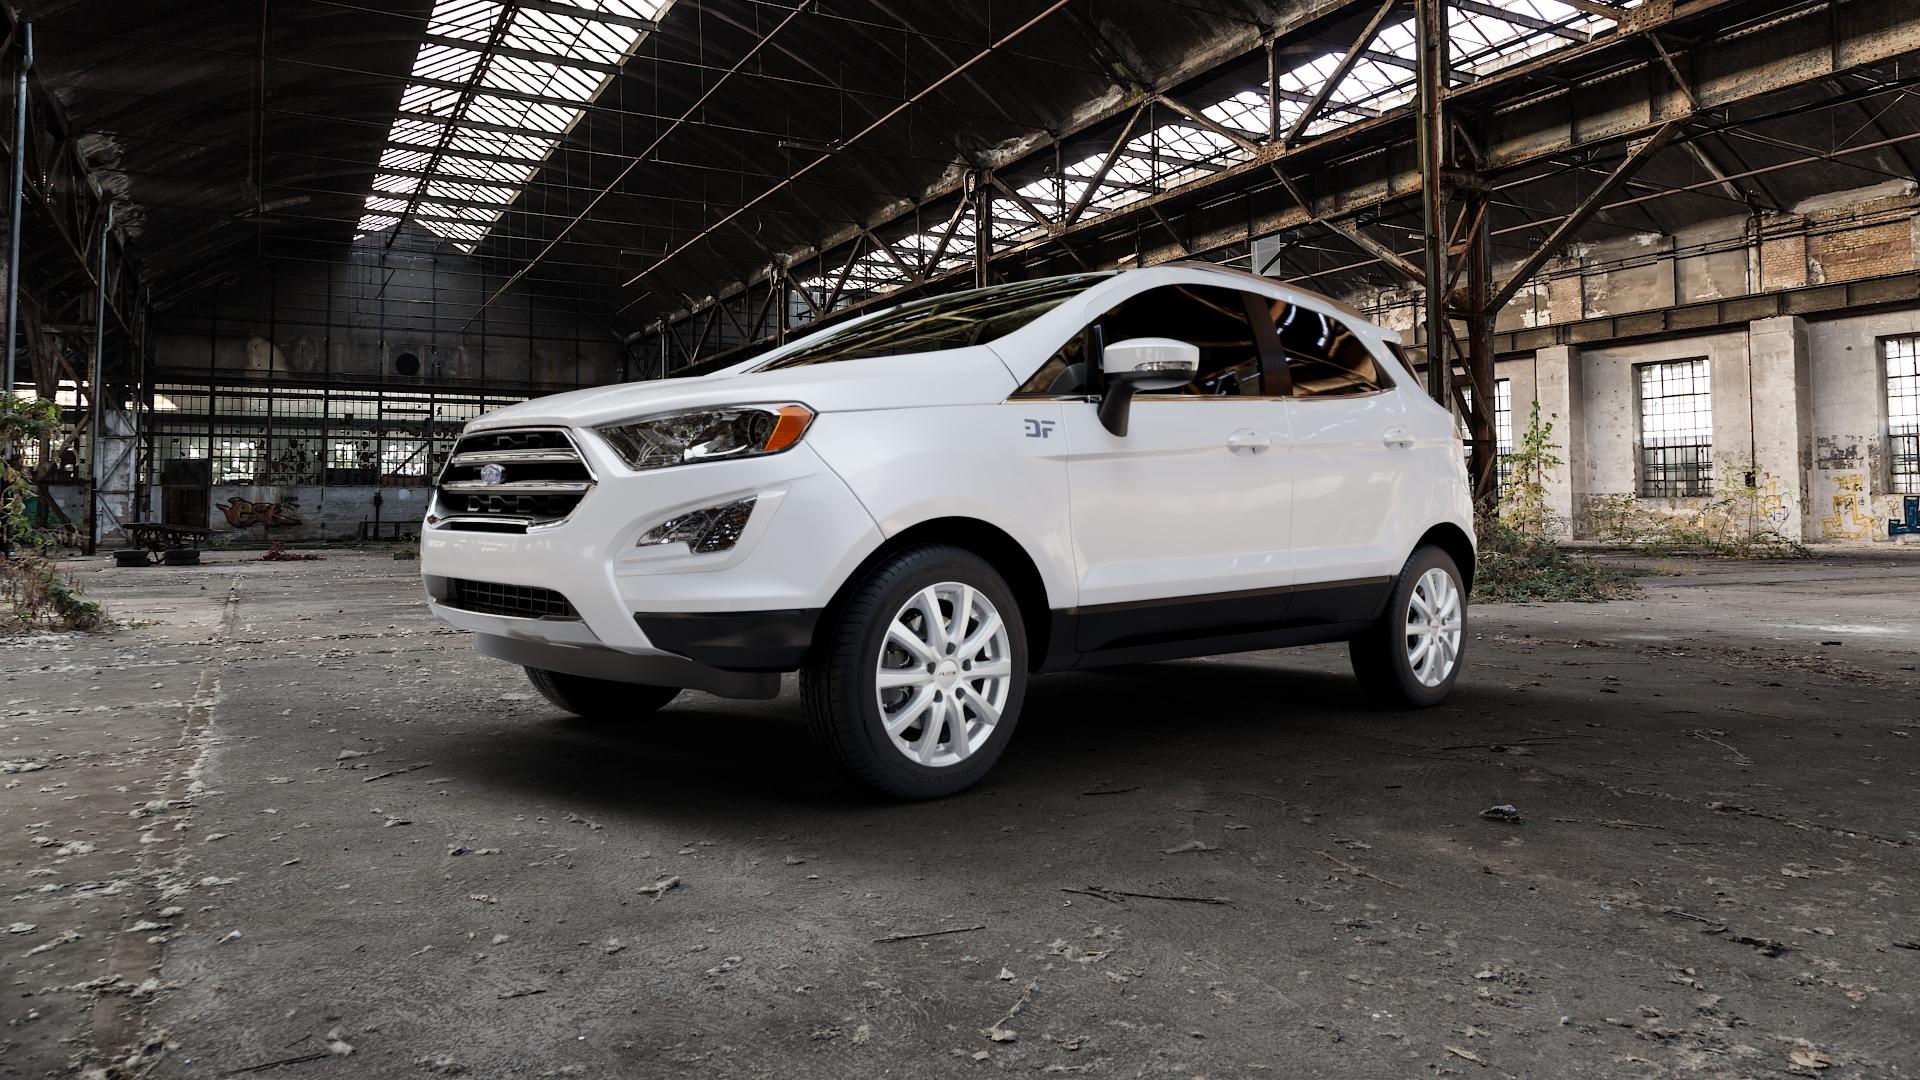 Ford EcoSport Type JK8 Facelift 1,0l EcoBoost 103kW (140 hp) Wheels and  Tyre Packages | velonity.com